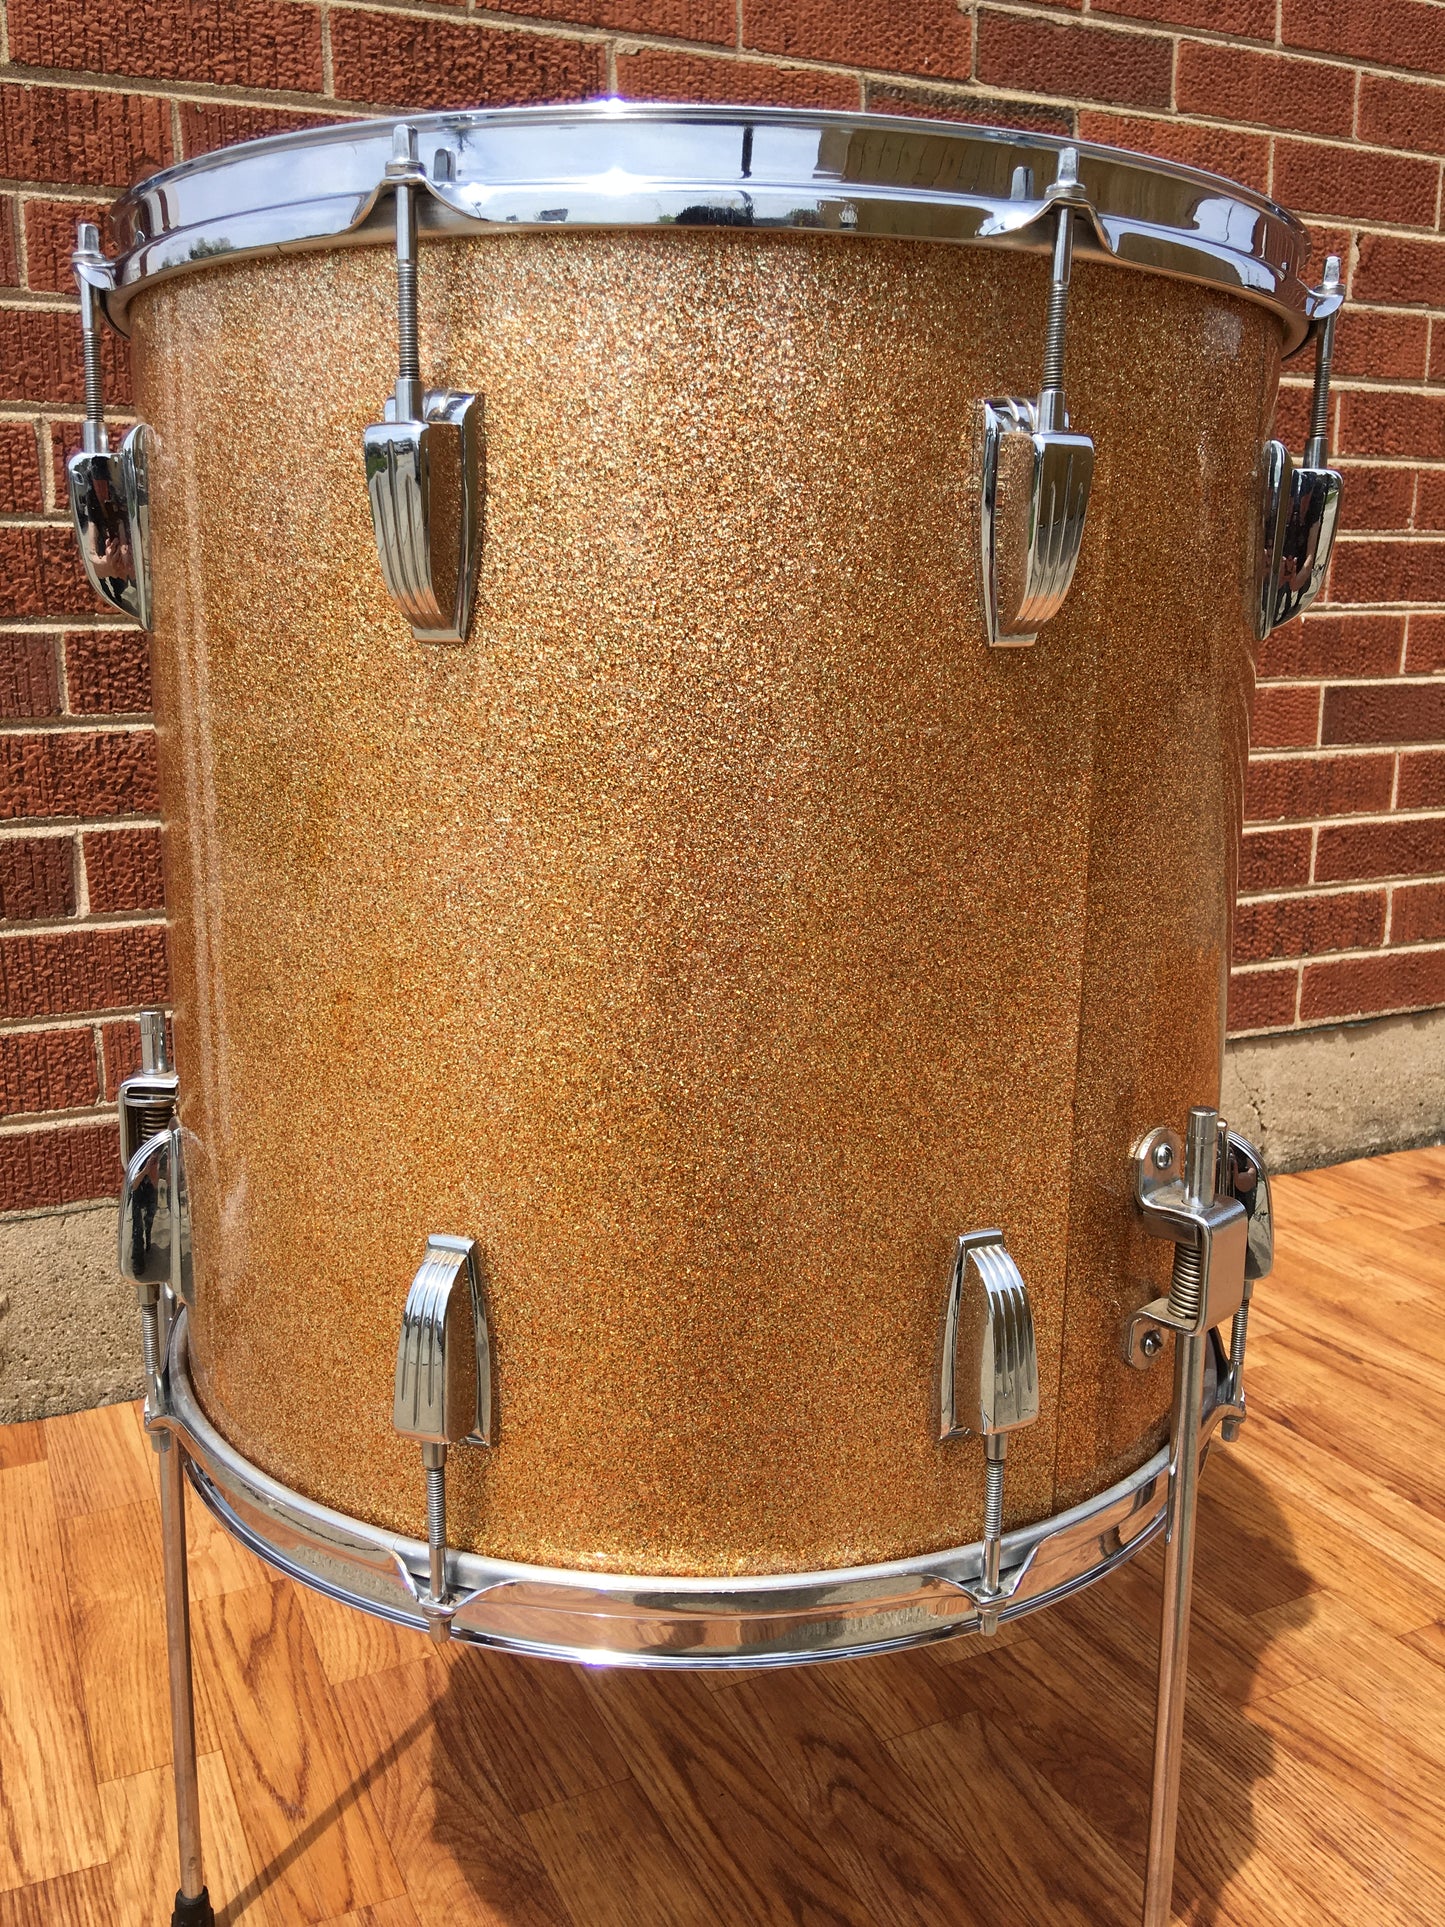 1948-52 Ludwig WFL 16x16 Super Classic Floor Tom Drum Champagne Sparkle